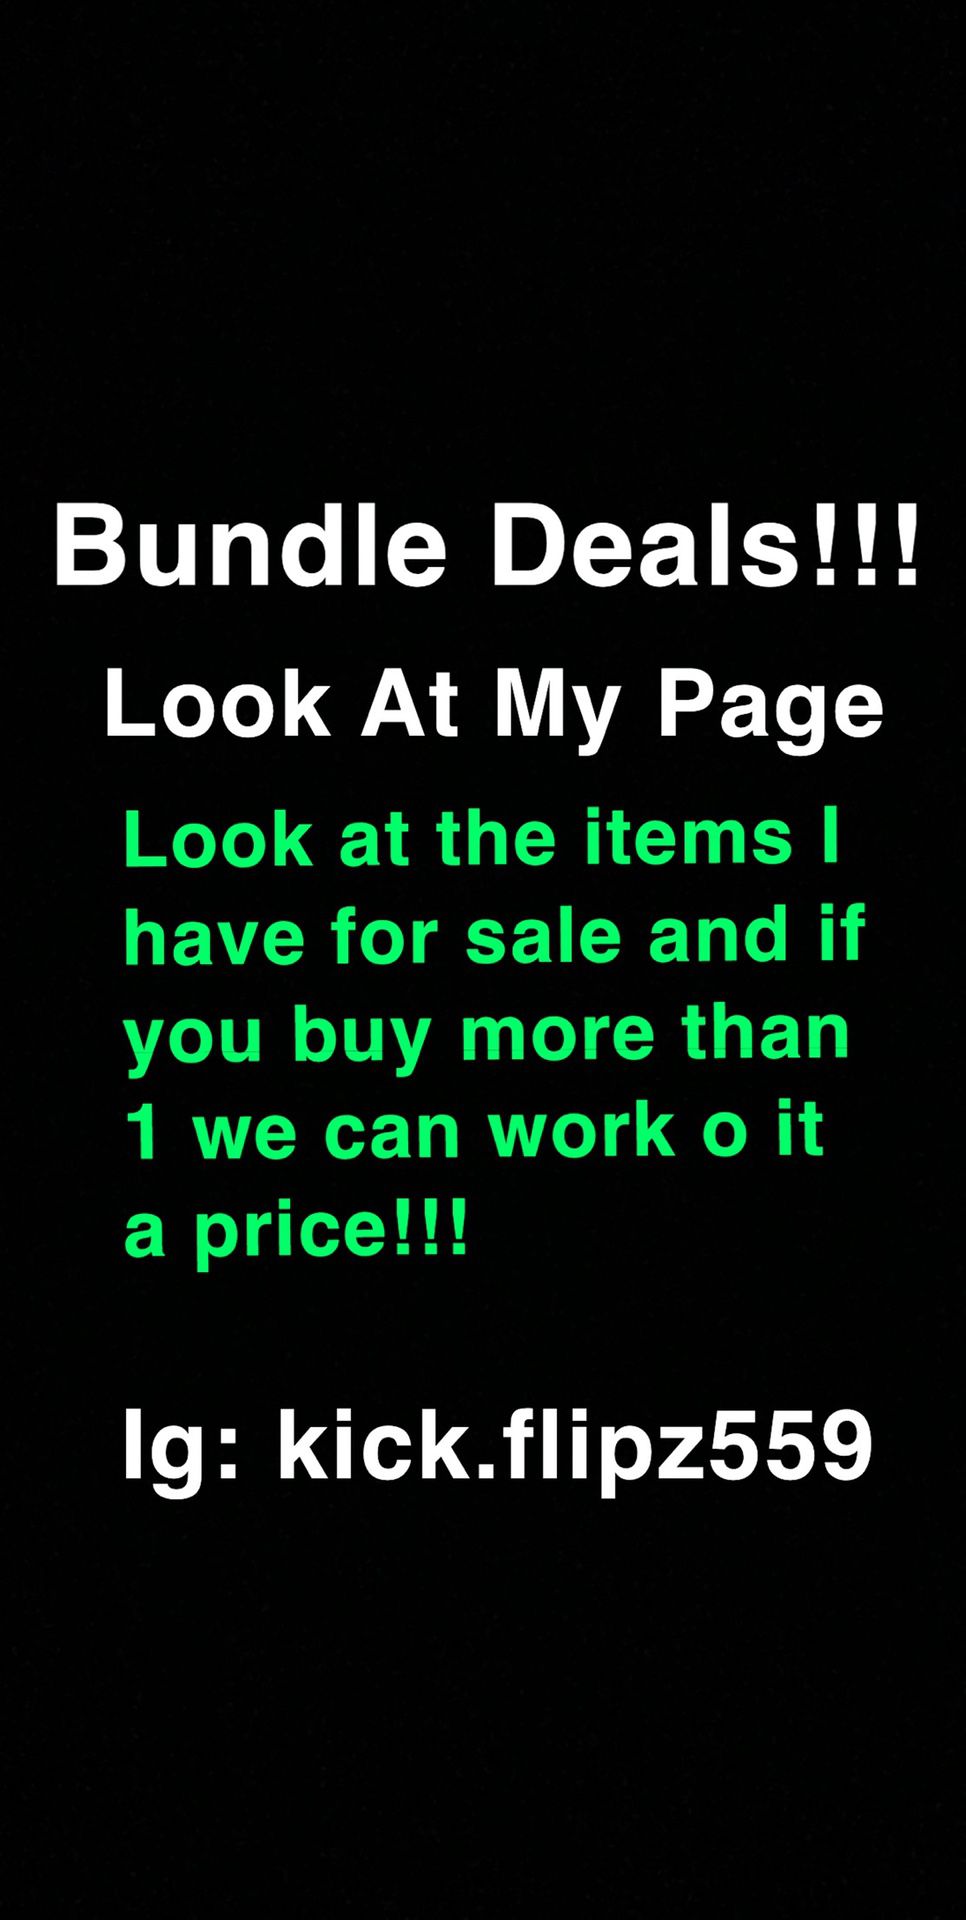 Buy more than 1 item for better pricing!!! Read description